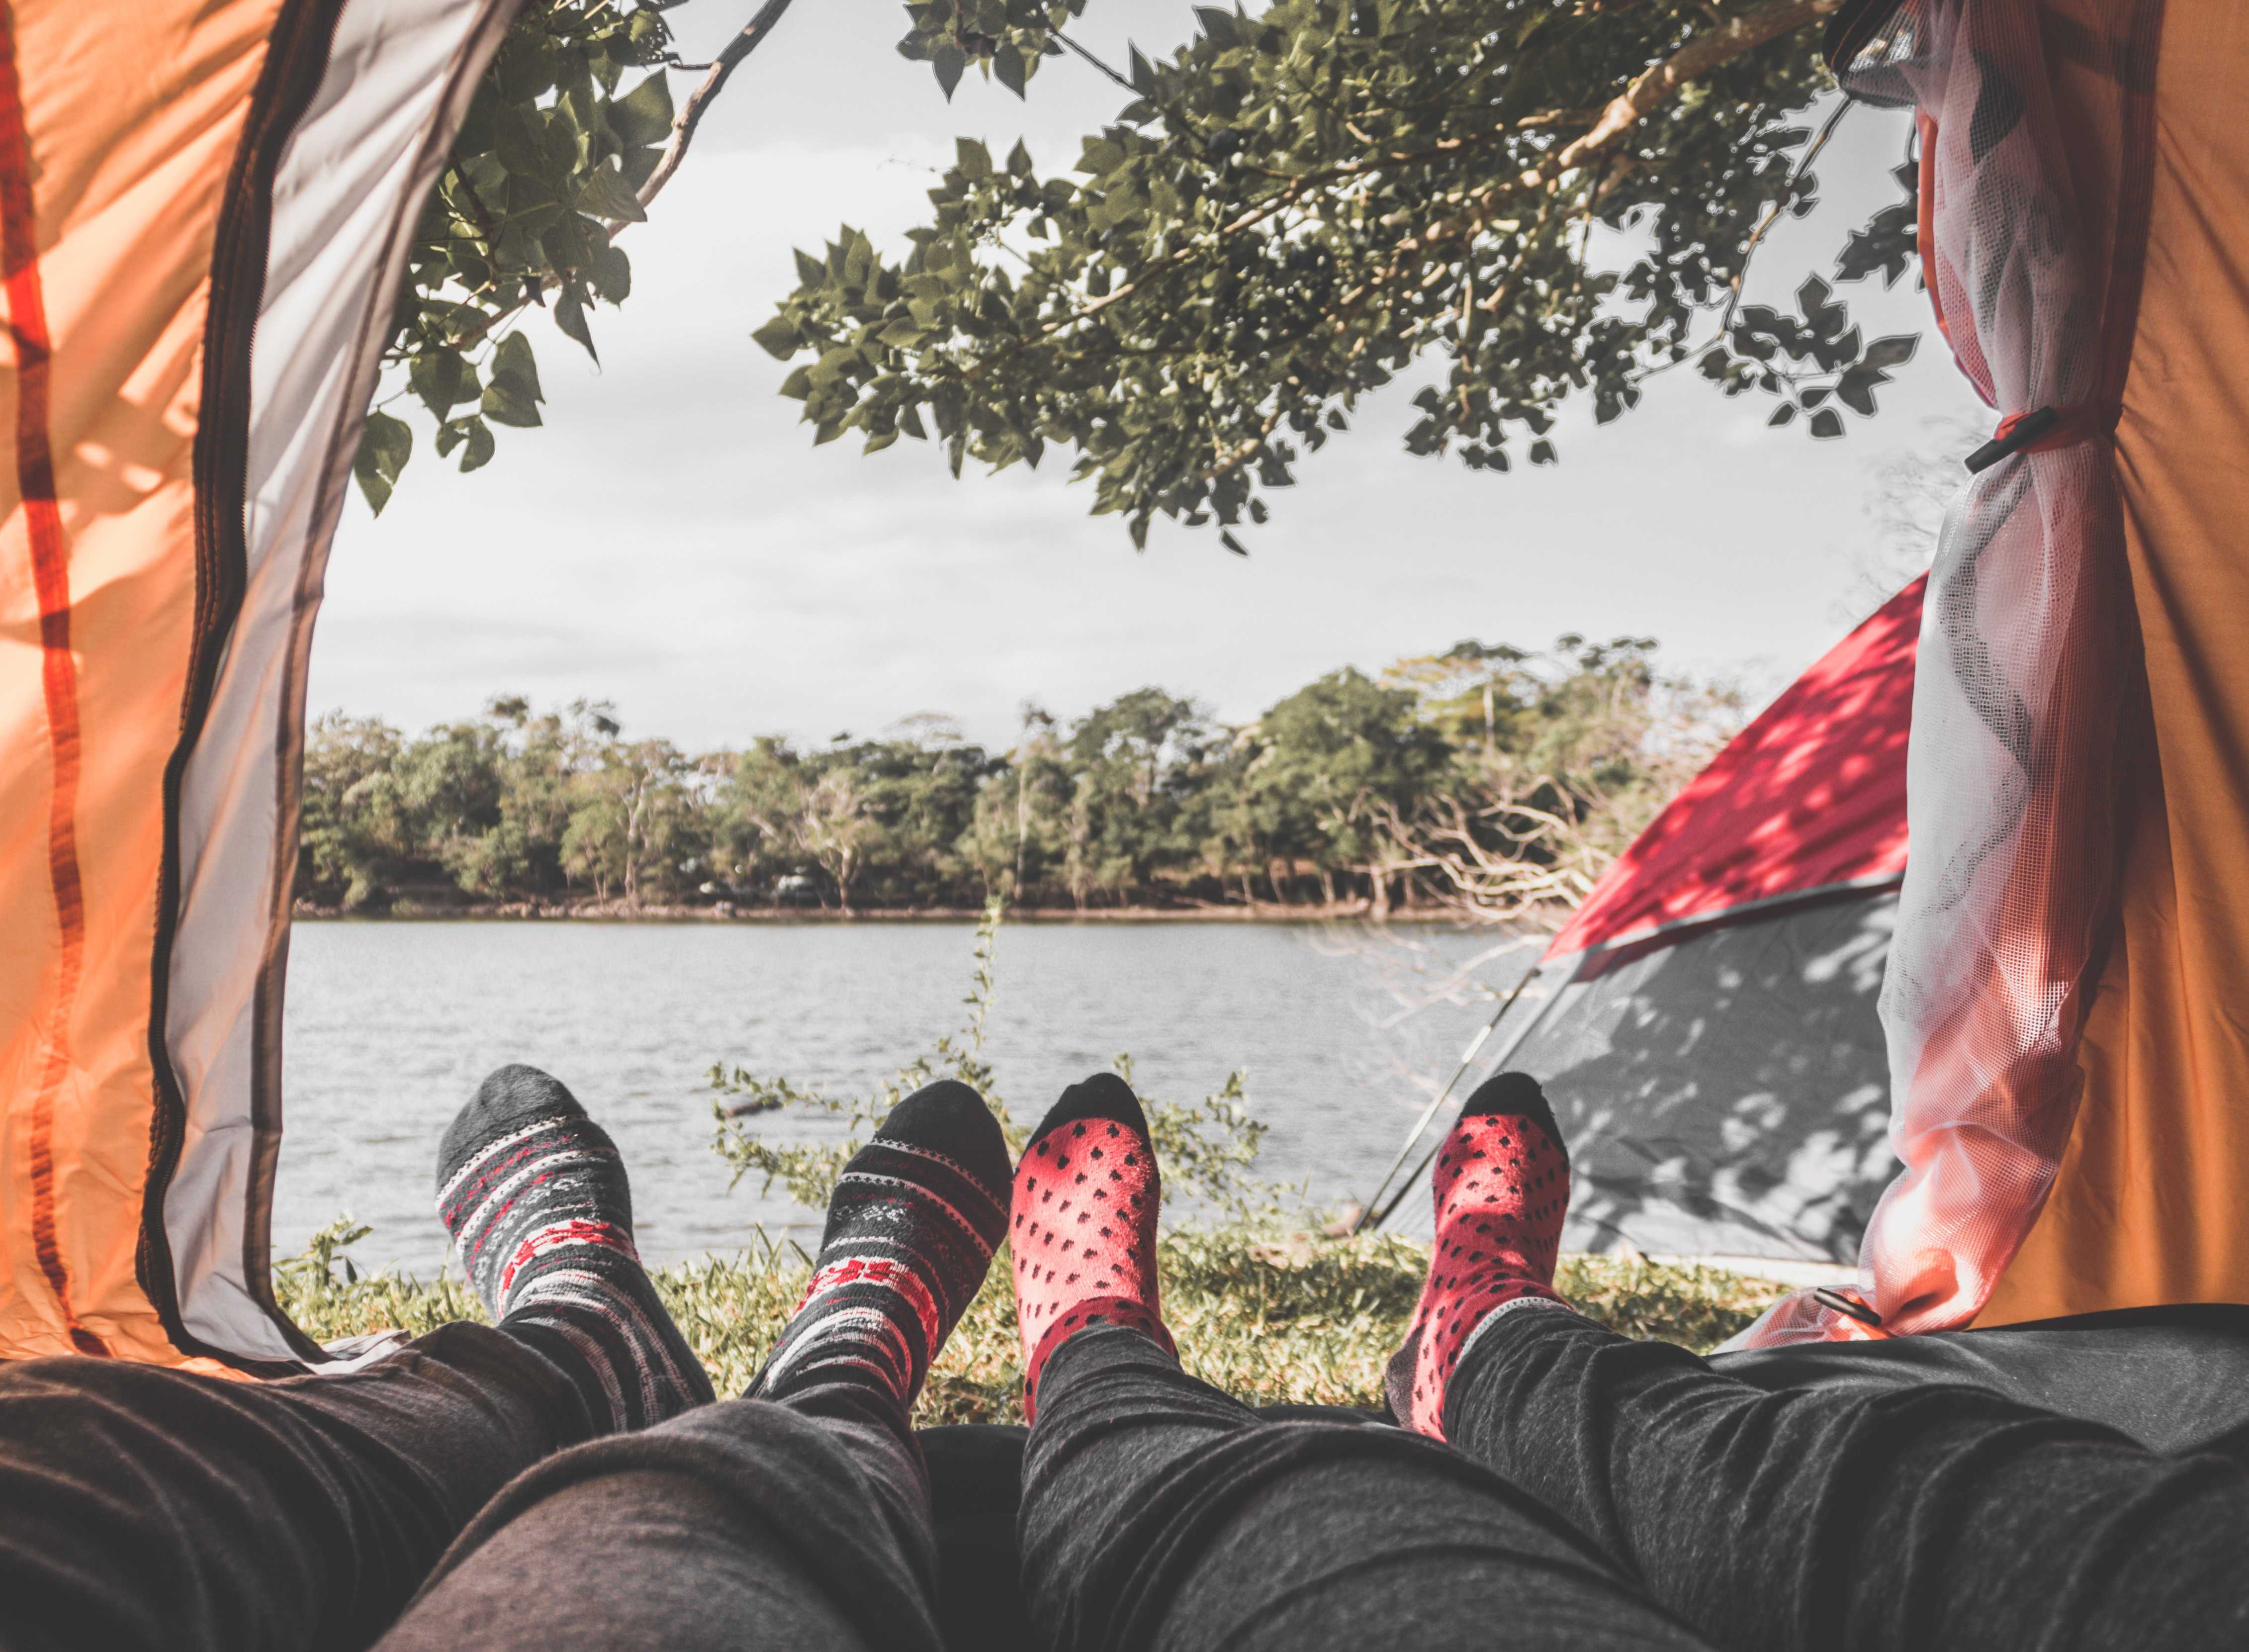 Some well-chosen essentials can make camping life more comfortable (photo: Kyle Glenn/Unsplash)